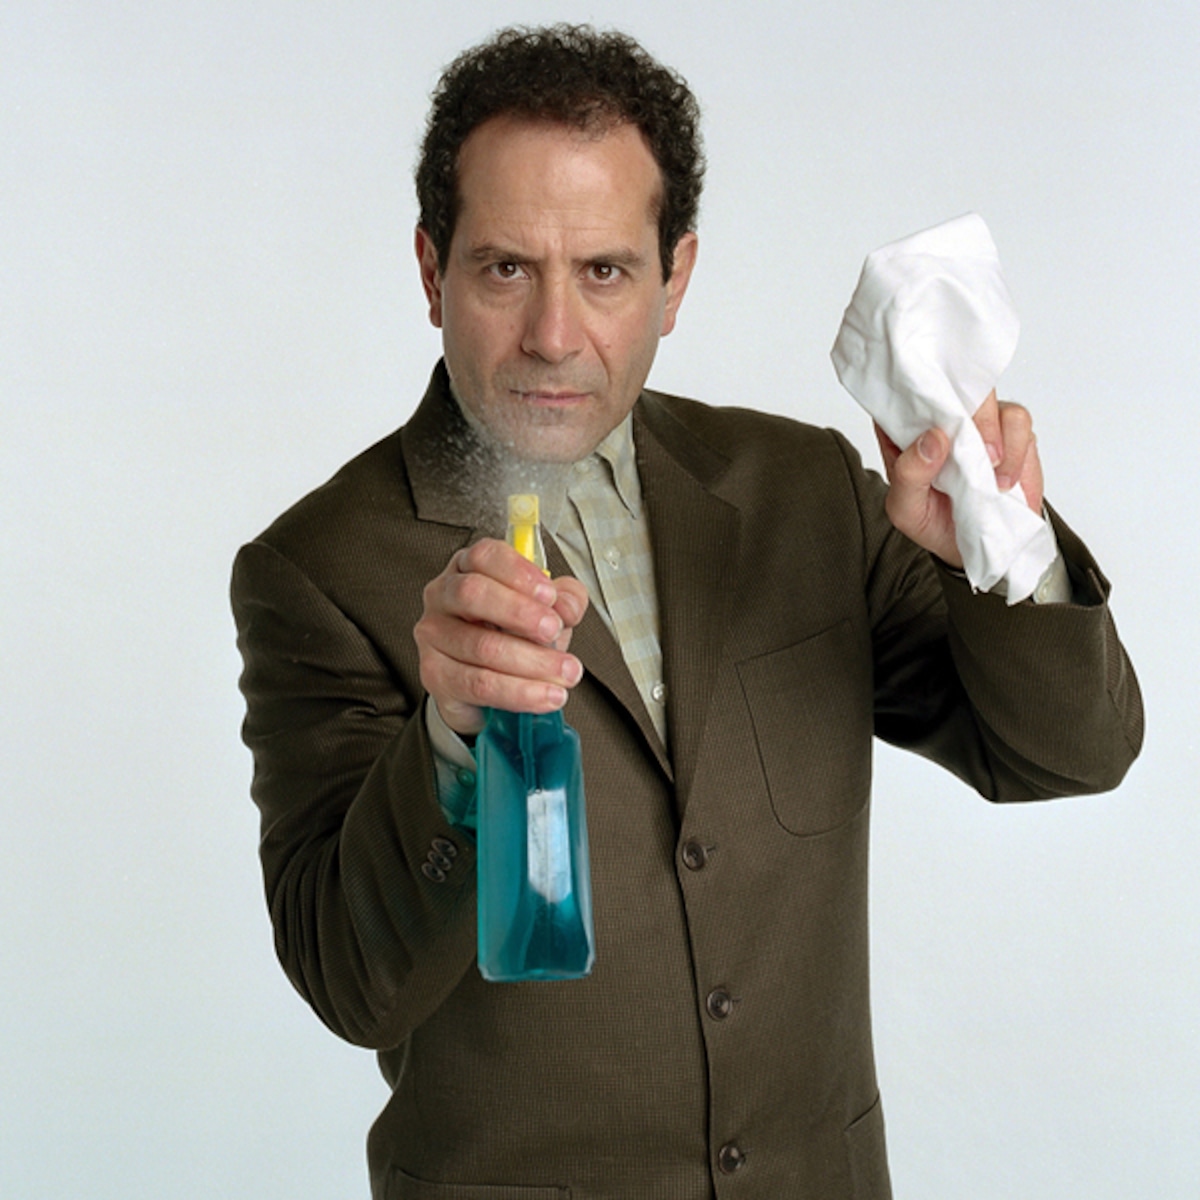 A Monk Movie With Tony Shalhoub Is Happening: All the Details